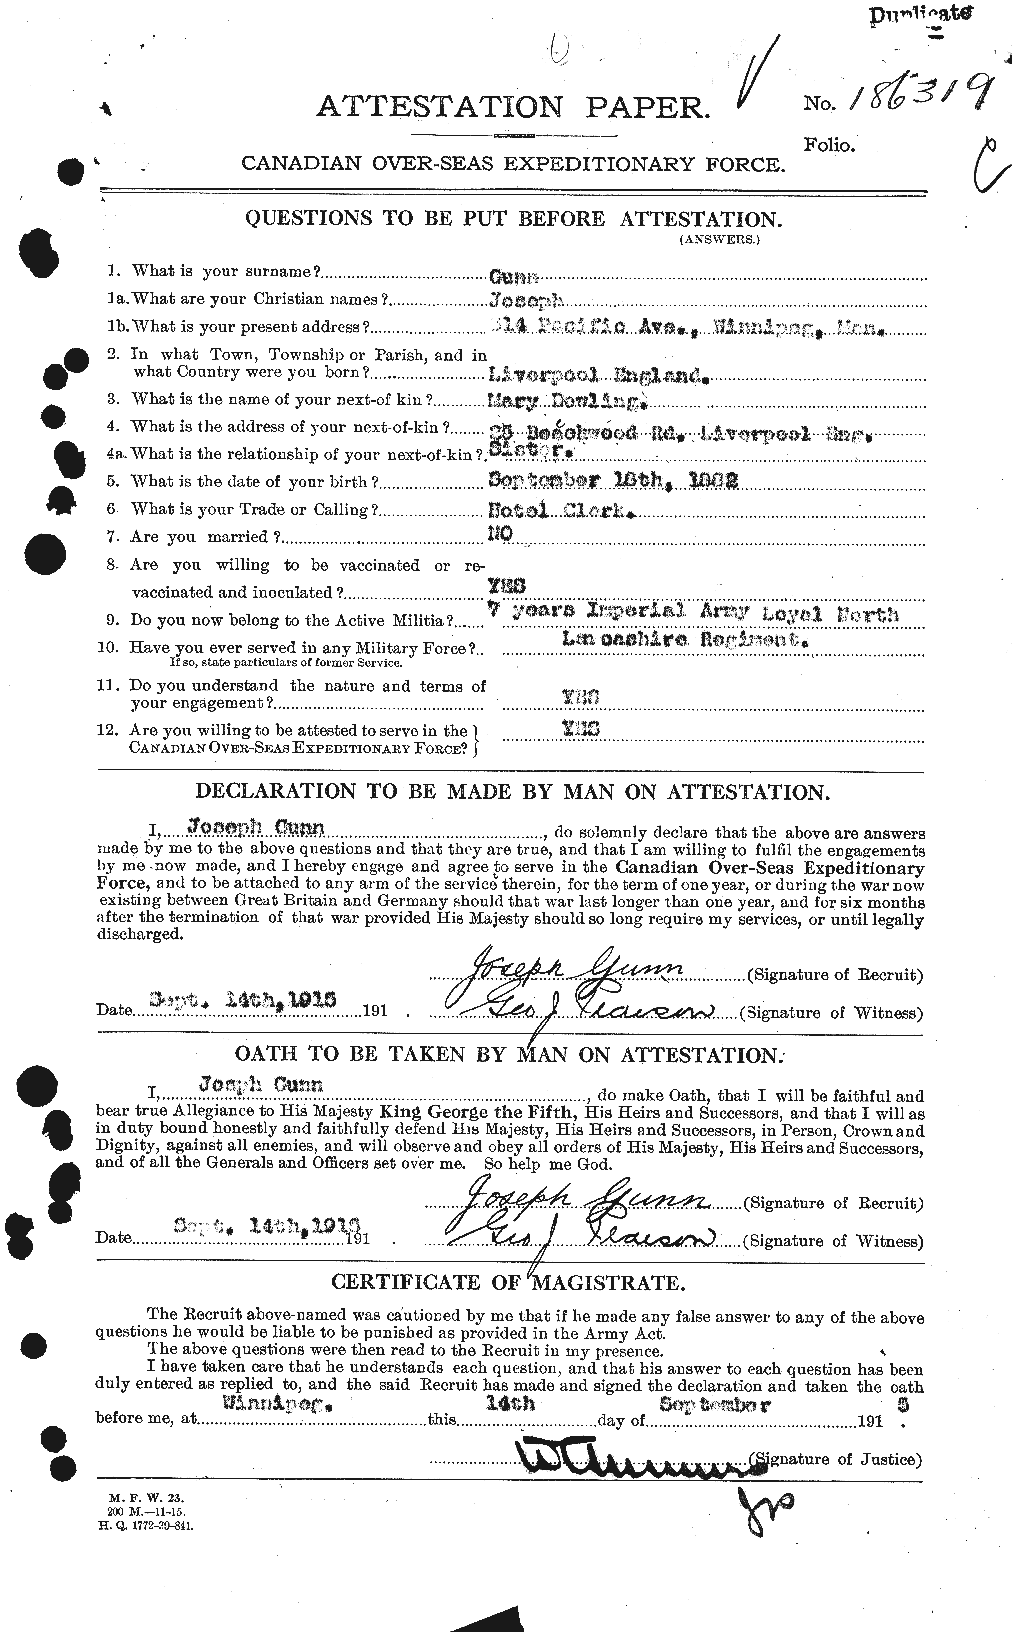 Personnel Records of the First World War - CEF 369305a